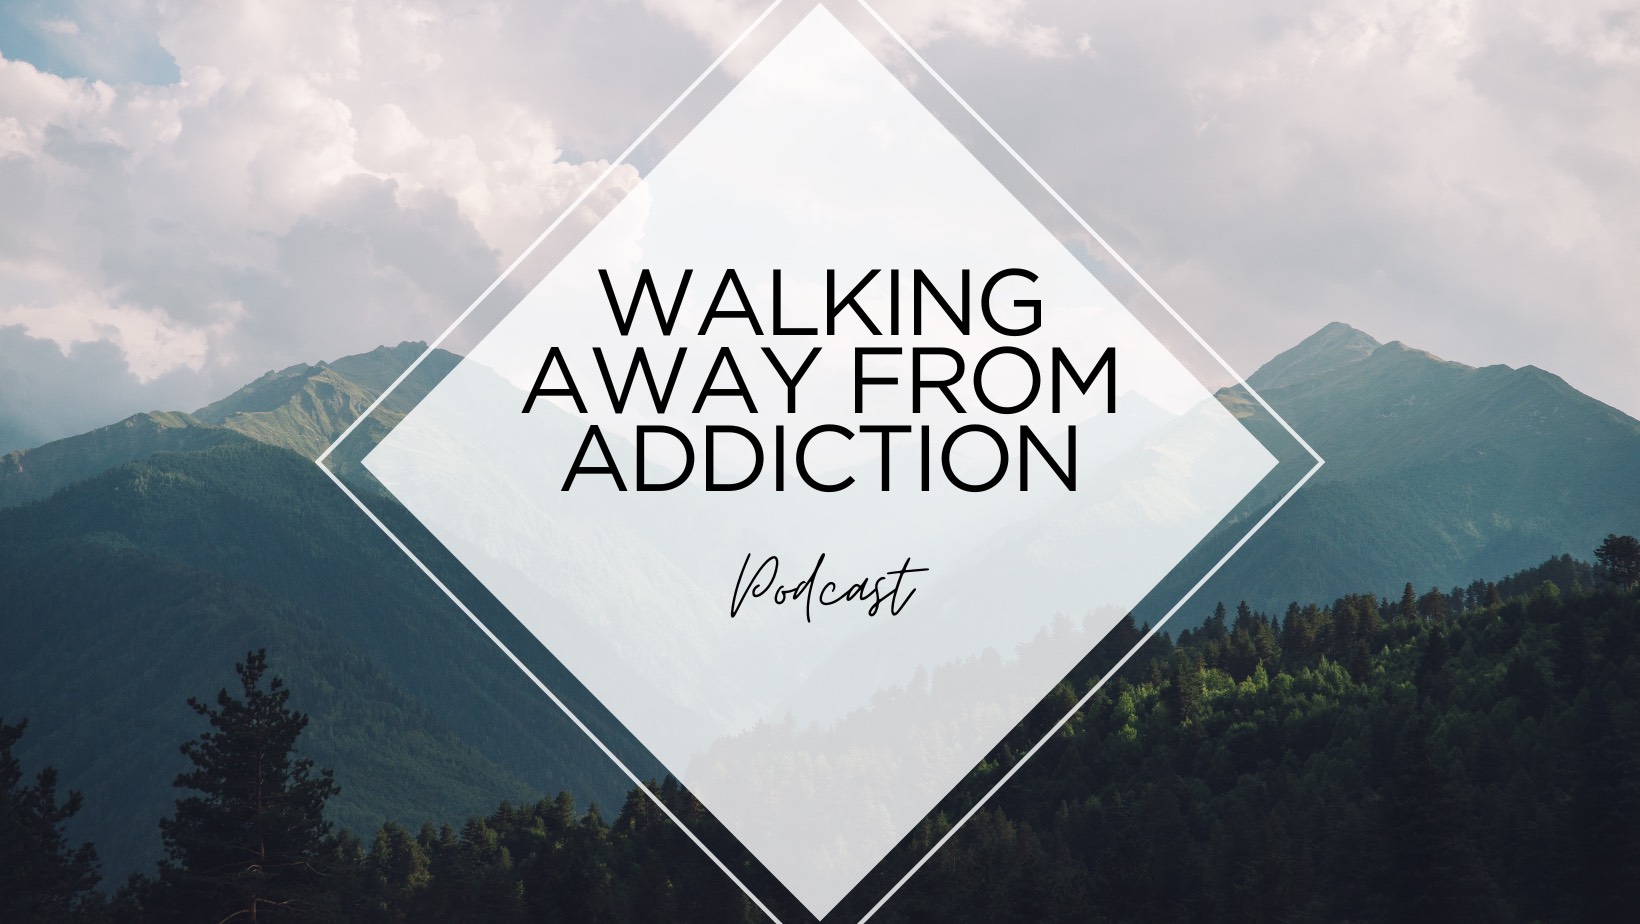 Walking Away from Addiction podcast